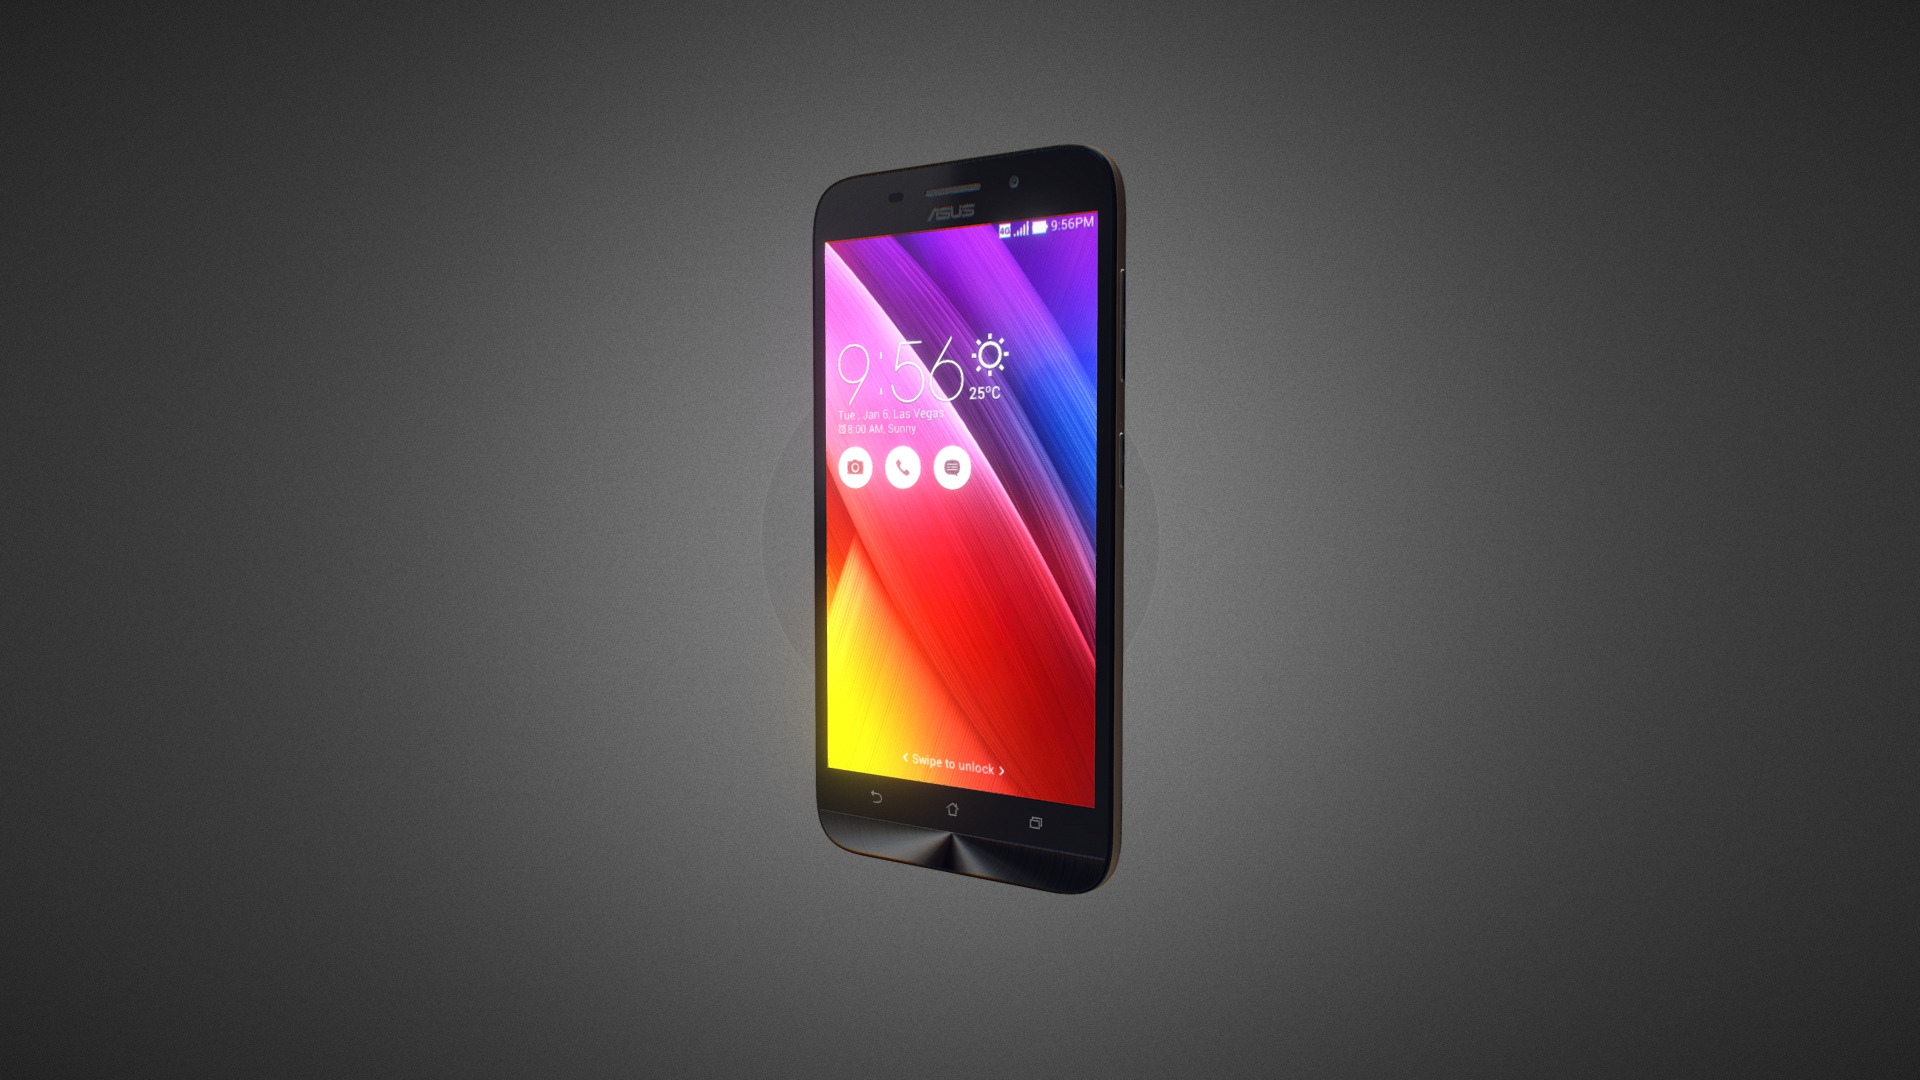 3D model Asus ZenFone Max for Element 3D - This is a 3D model of the Asus ZenFone Max for Element 3D. The 3D model is about a cell phone with a colorful display.